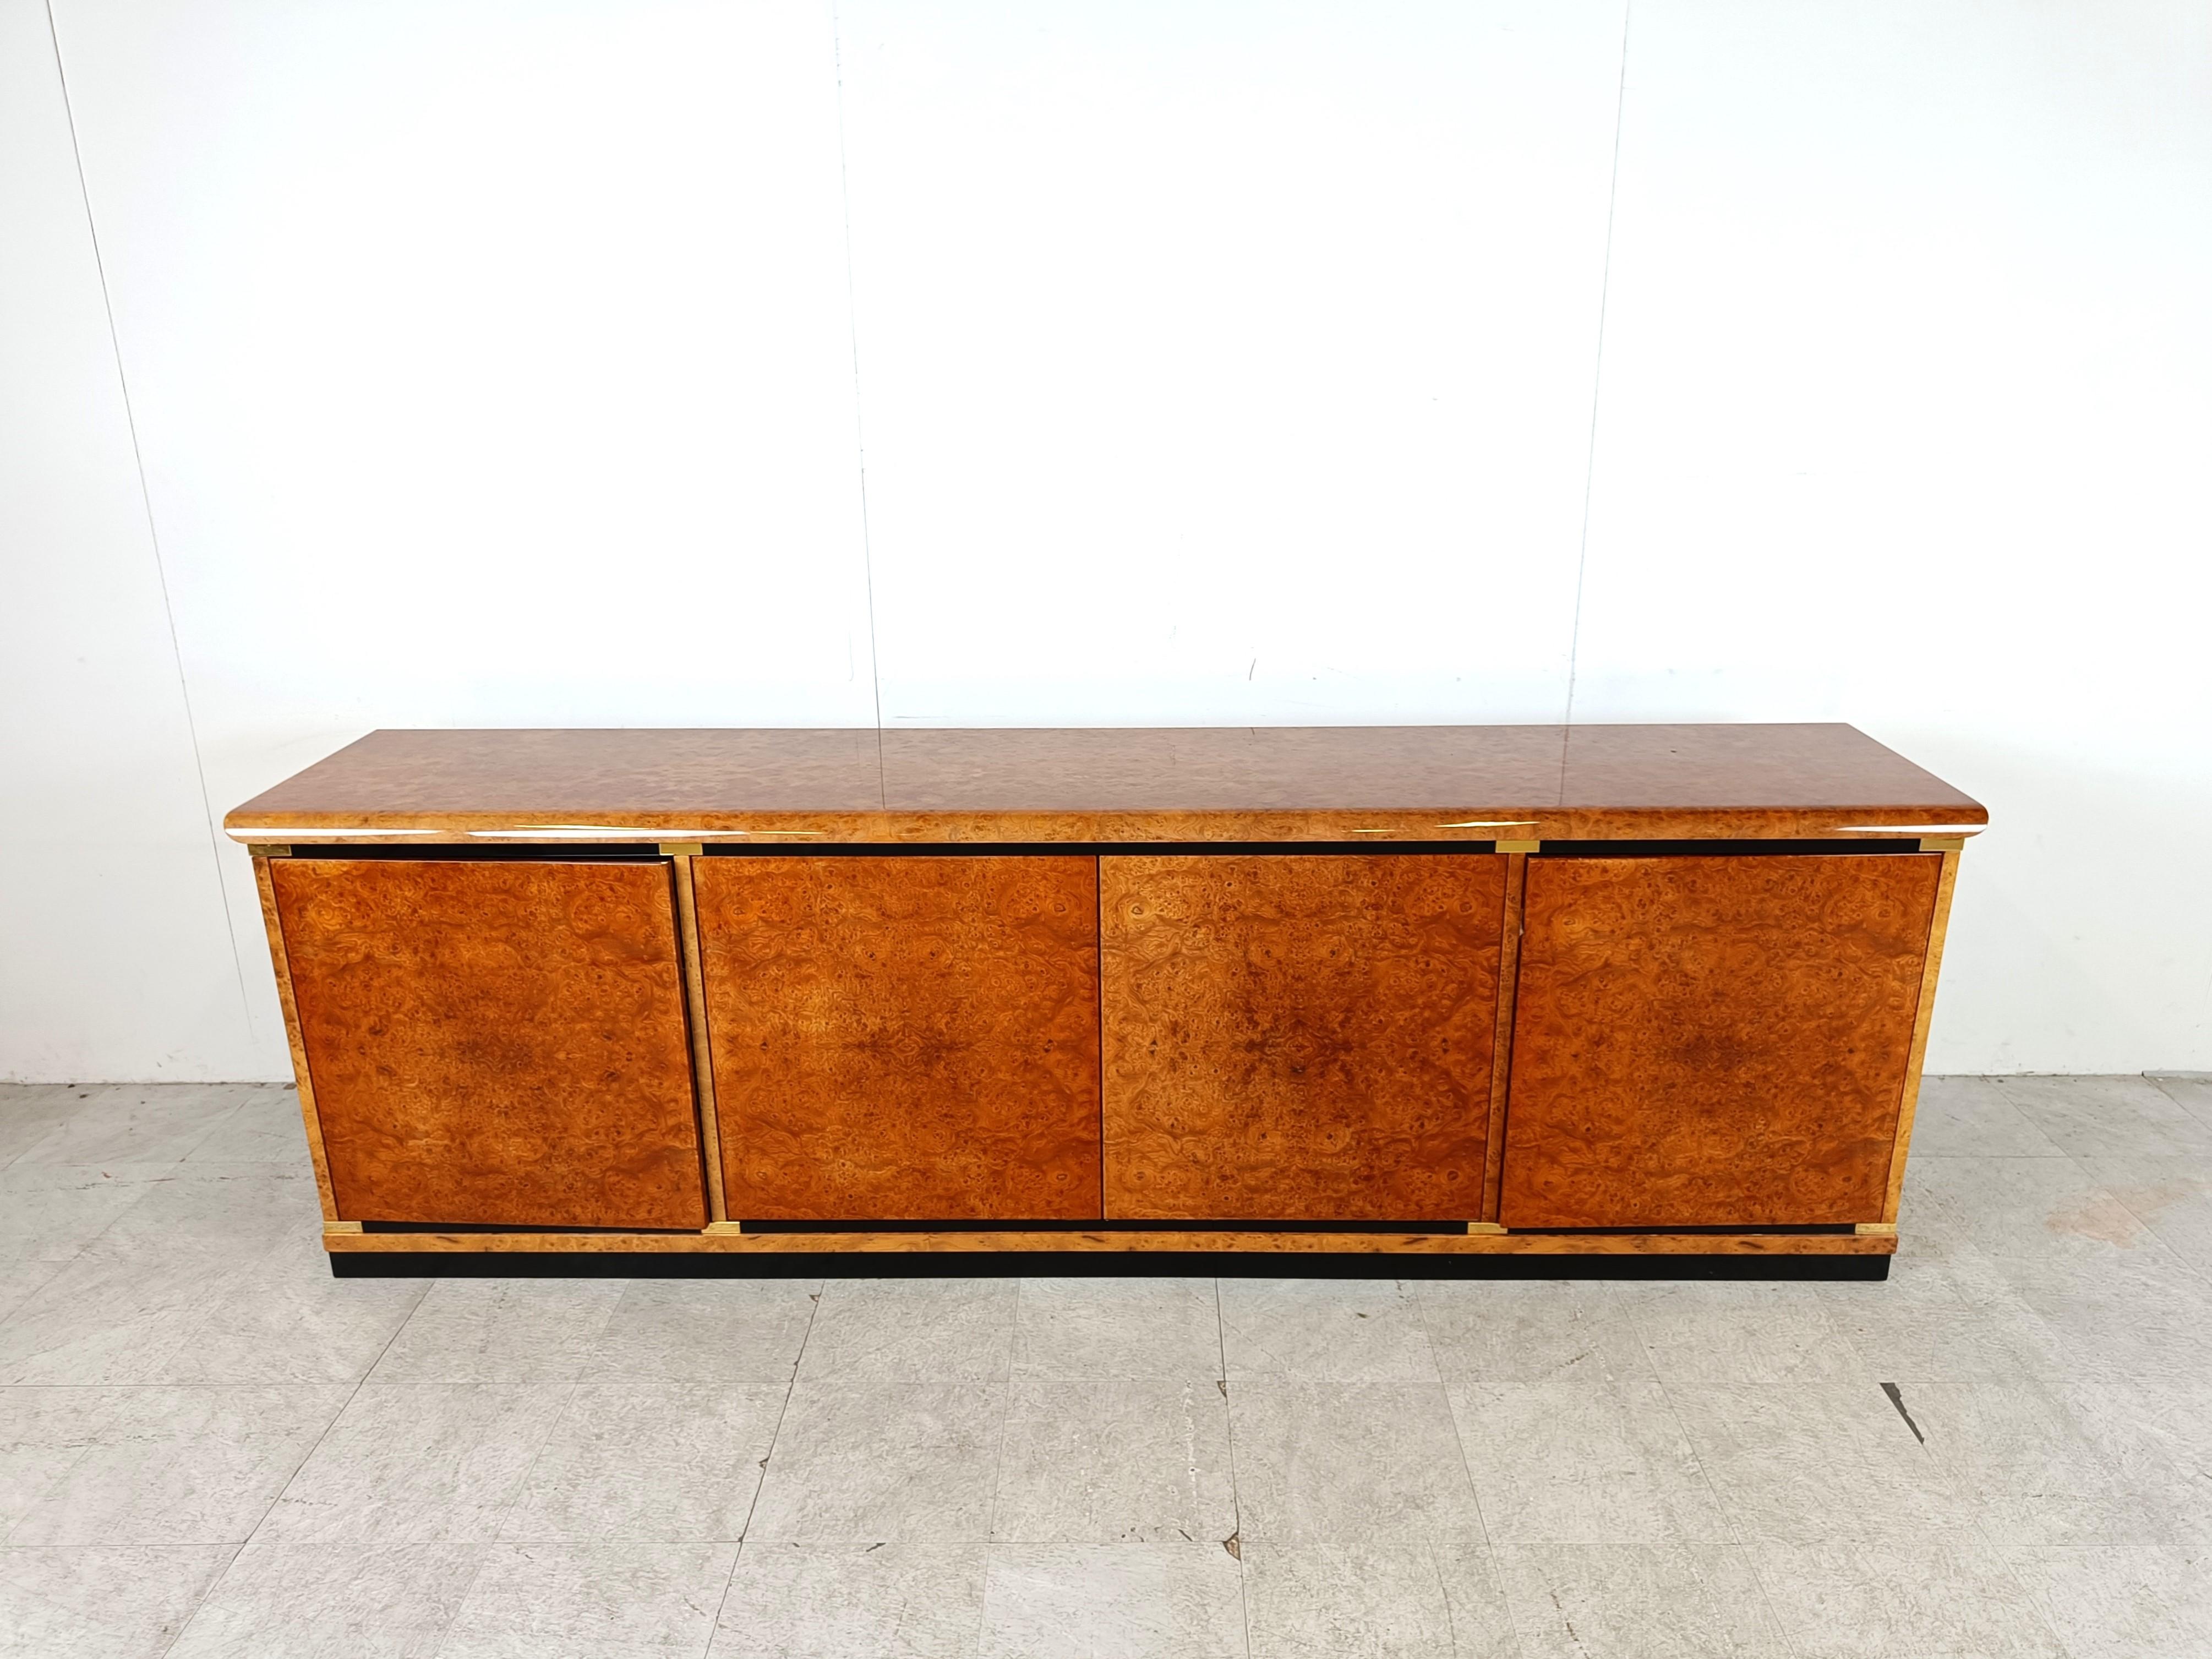 High quality burl wood sideboard/credenza.

This piece has been built with extremely high quality and is finished in burl wood all over. (outside, inside and even beautifully finished at the back)

It consists of 4 doors with 4 integrated drawers